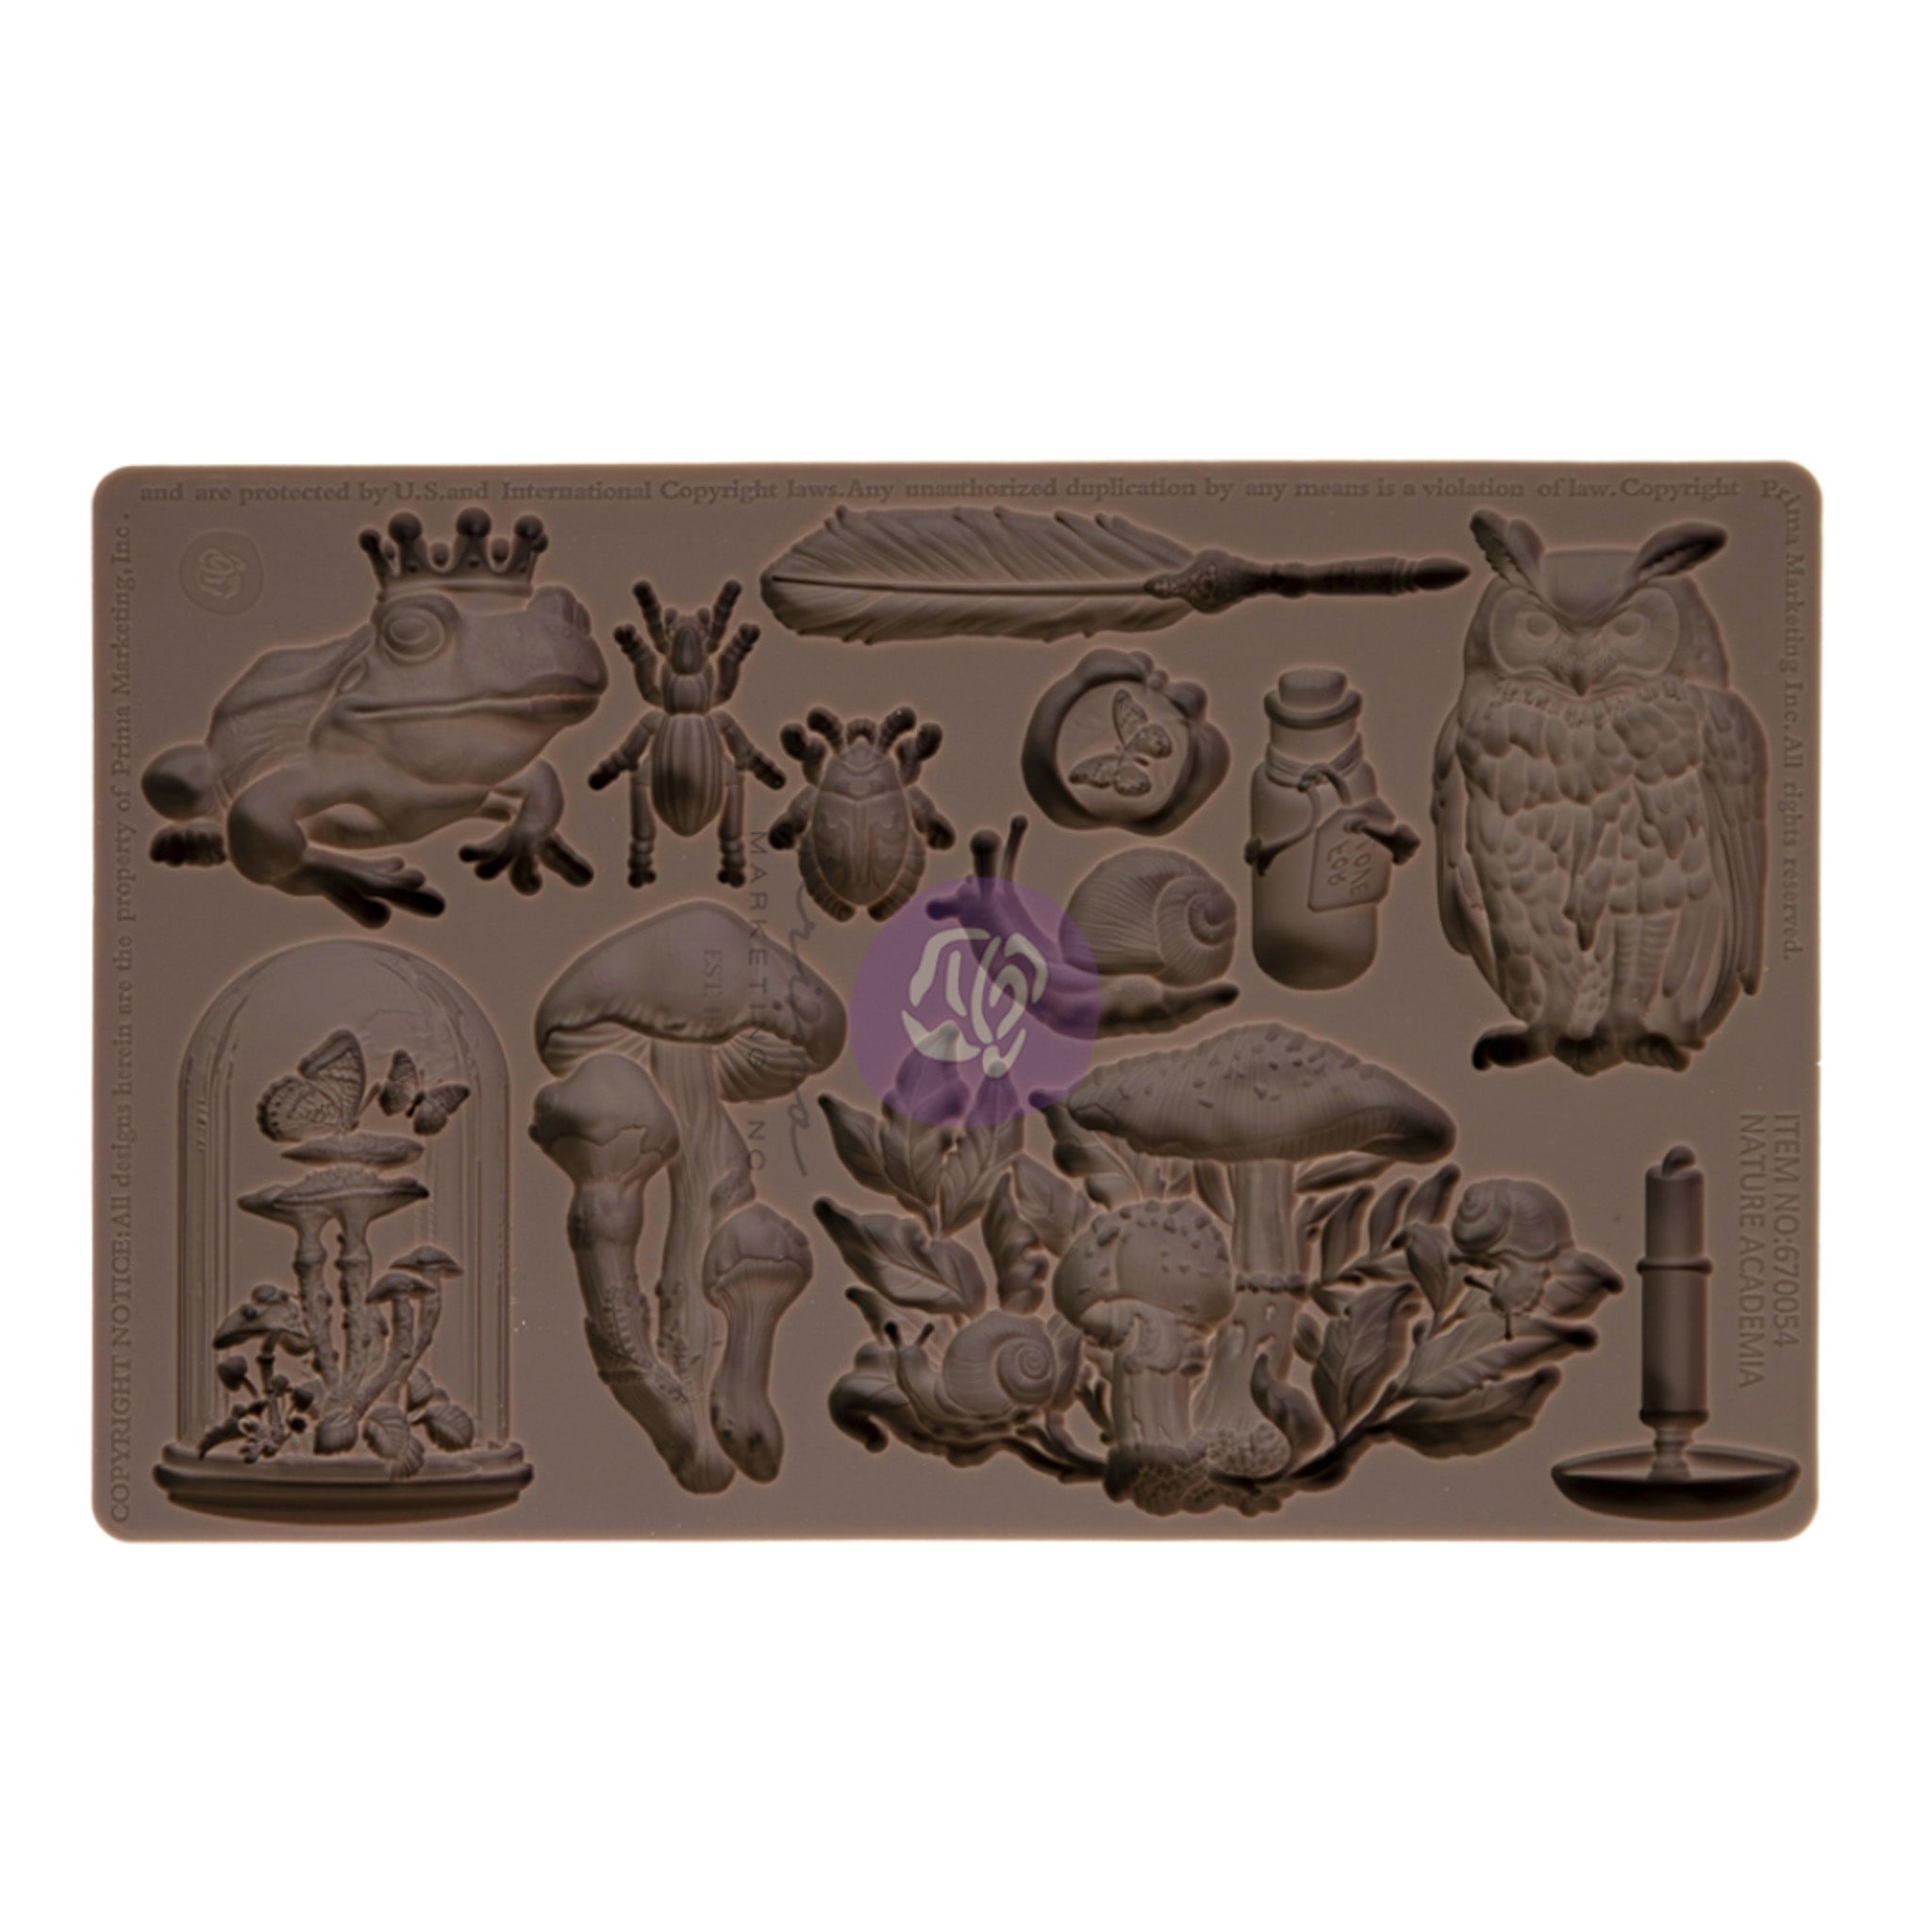 A brown silicone mold featuring bugs, mushrooms, a frog with a crown, and an owl is against a white background.